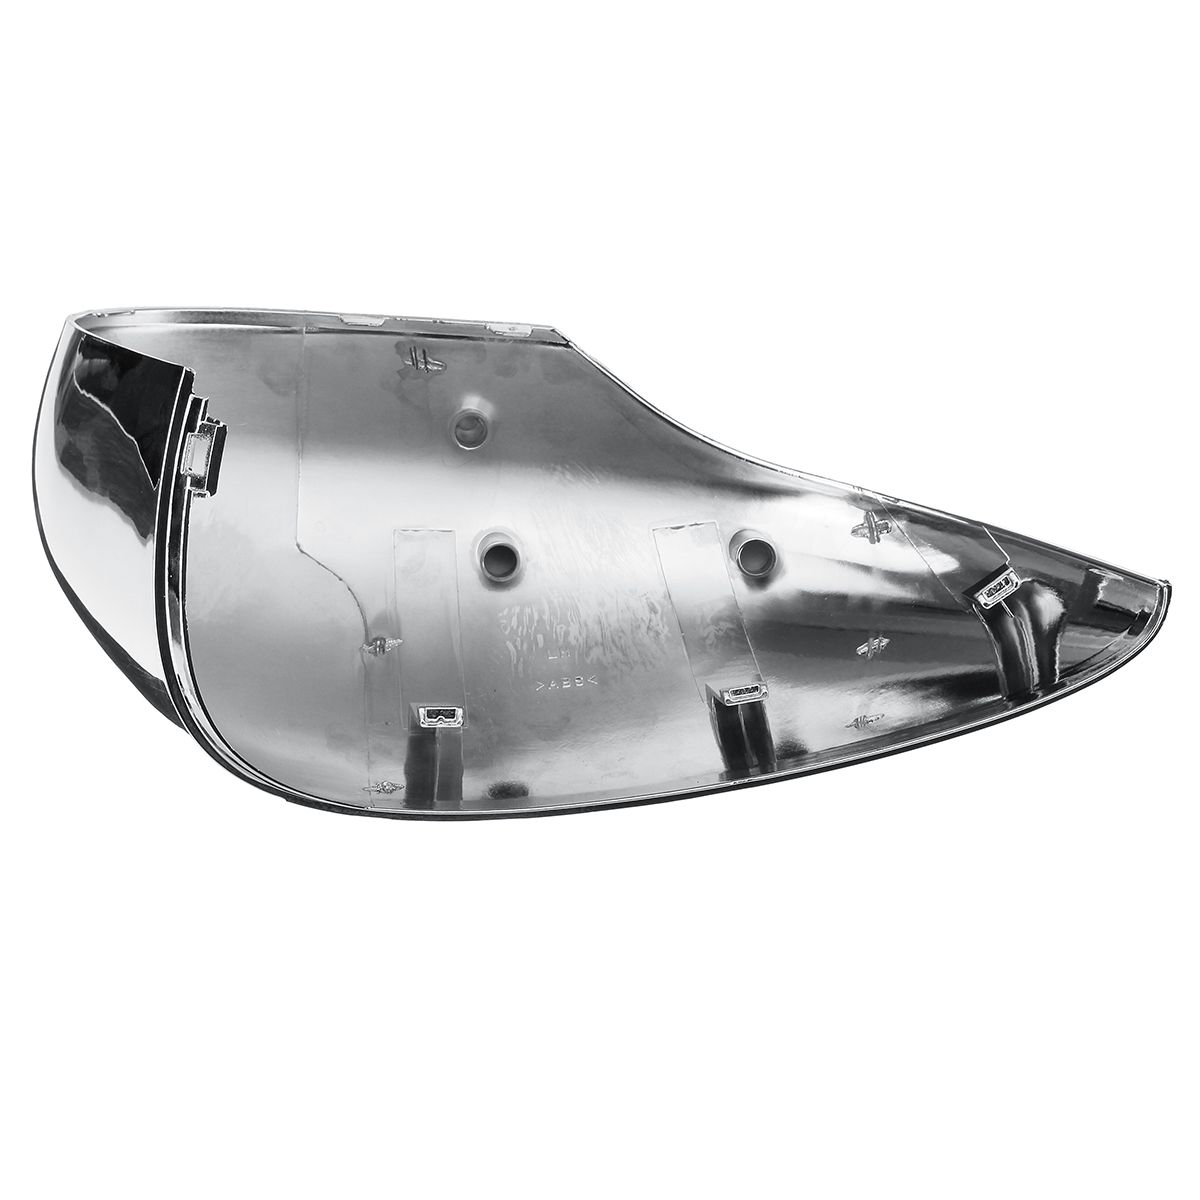 Chrome-Light-Car-Door-Rearview-Wing-Mirror-Cover-Cap-LeftRight-For-Ford-Fiesta-MK7-2008-2017-1639565